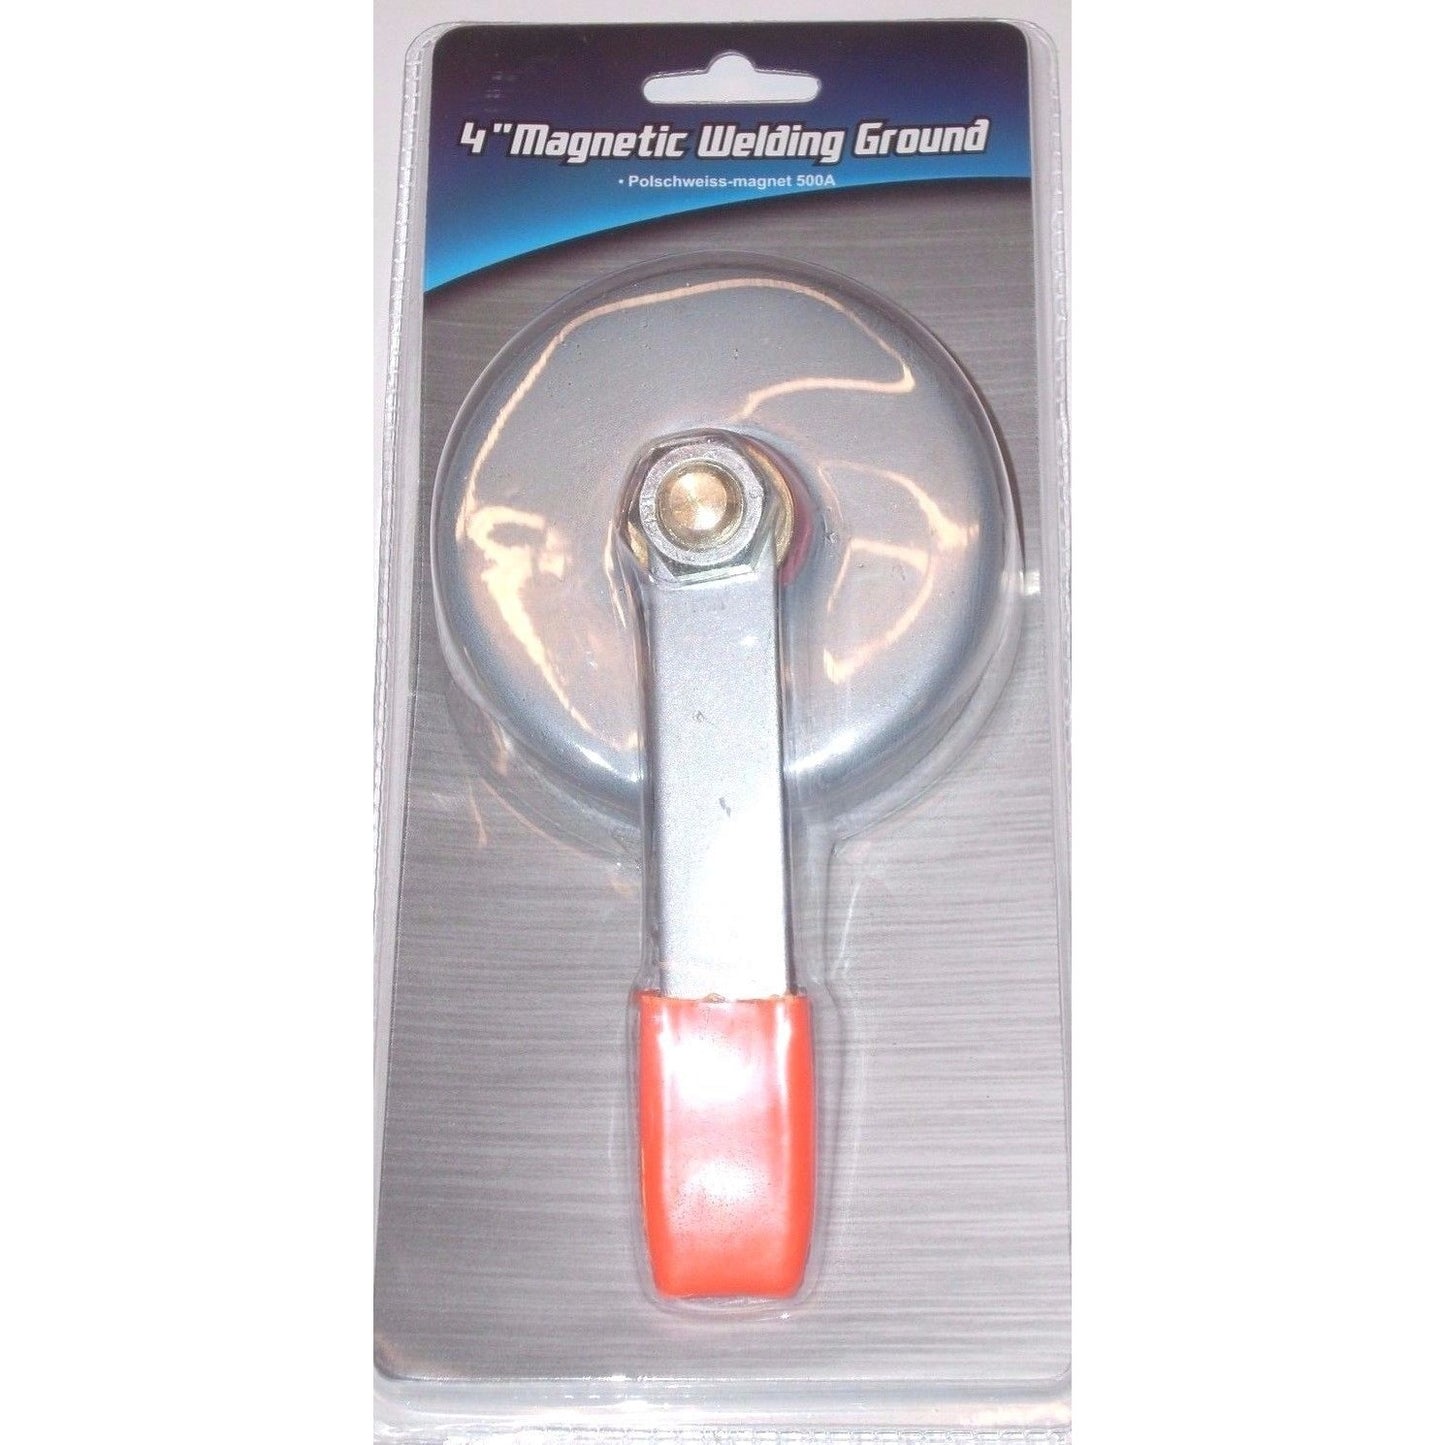 4" Magnetic Welding Ground Clamp w Lift Handle 500A Capacity 1/2" Stud Bolt - ATL Welding Supply